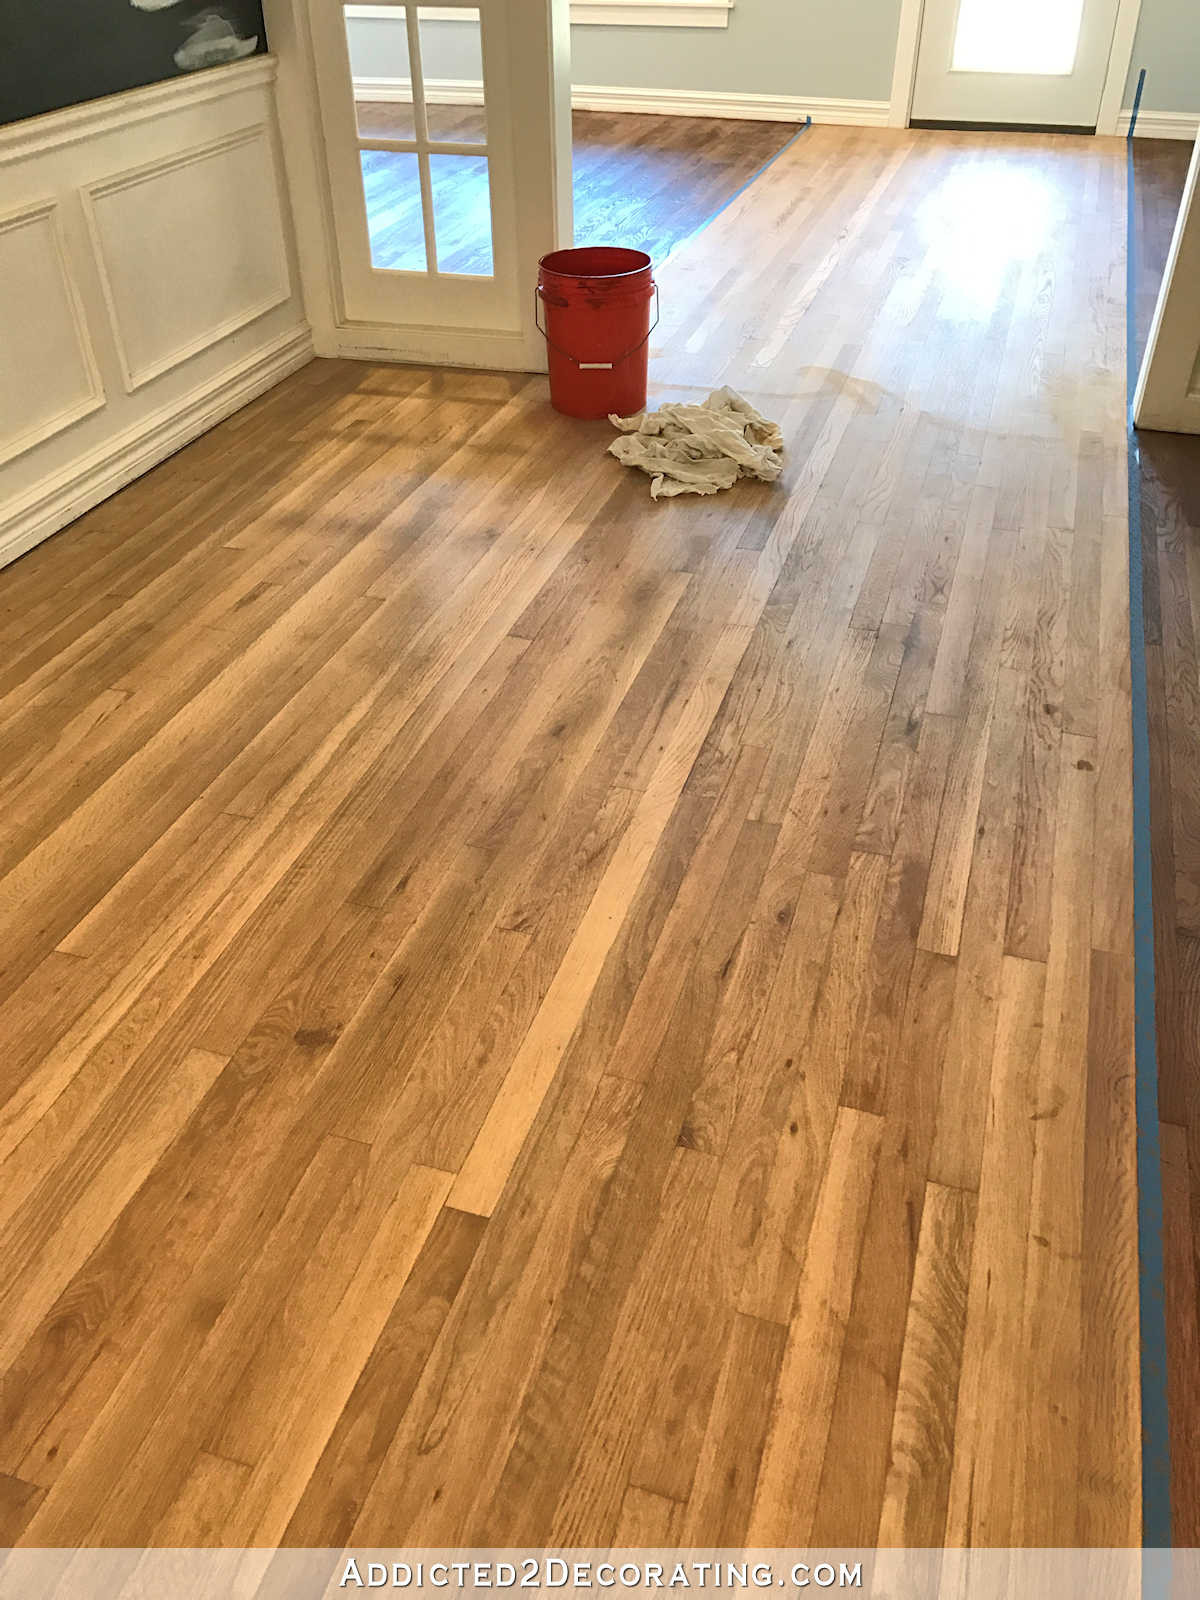 27 attractive How Difficult is It to Refinish Hardwood Floors 2024 free download how difficult is it to refinish hardwood floors of adventures in staining my red oak hardwood floors products process with staining red oak hardwood floors 8 entryway and music room wood con